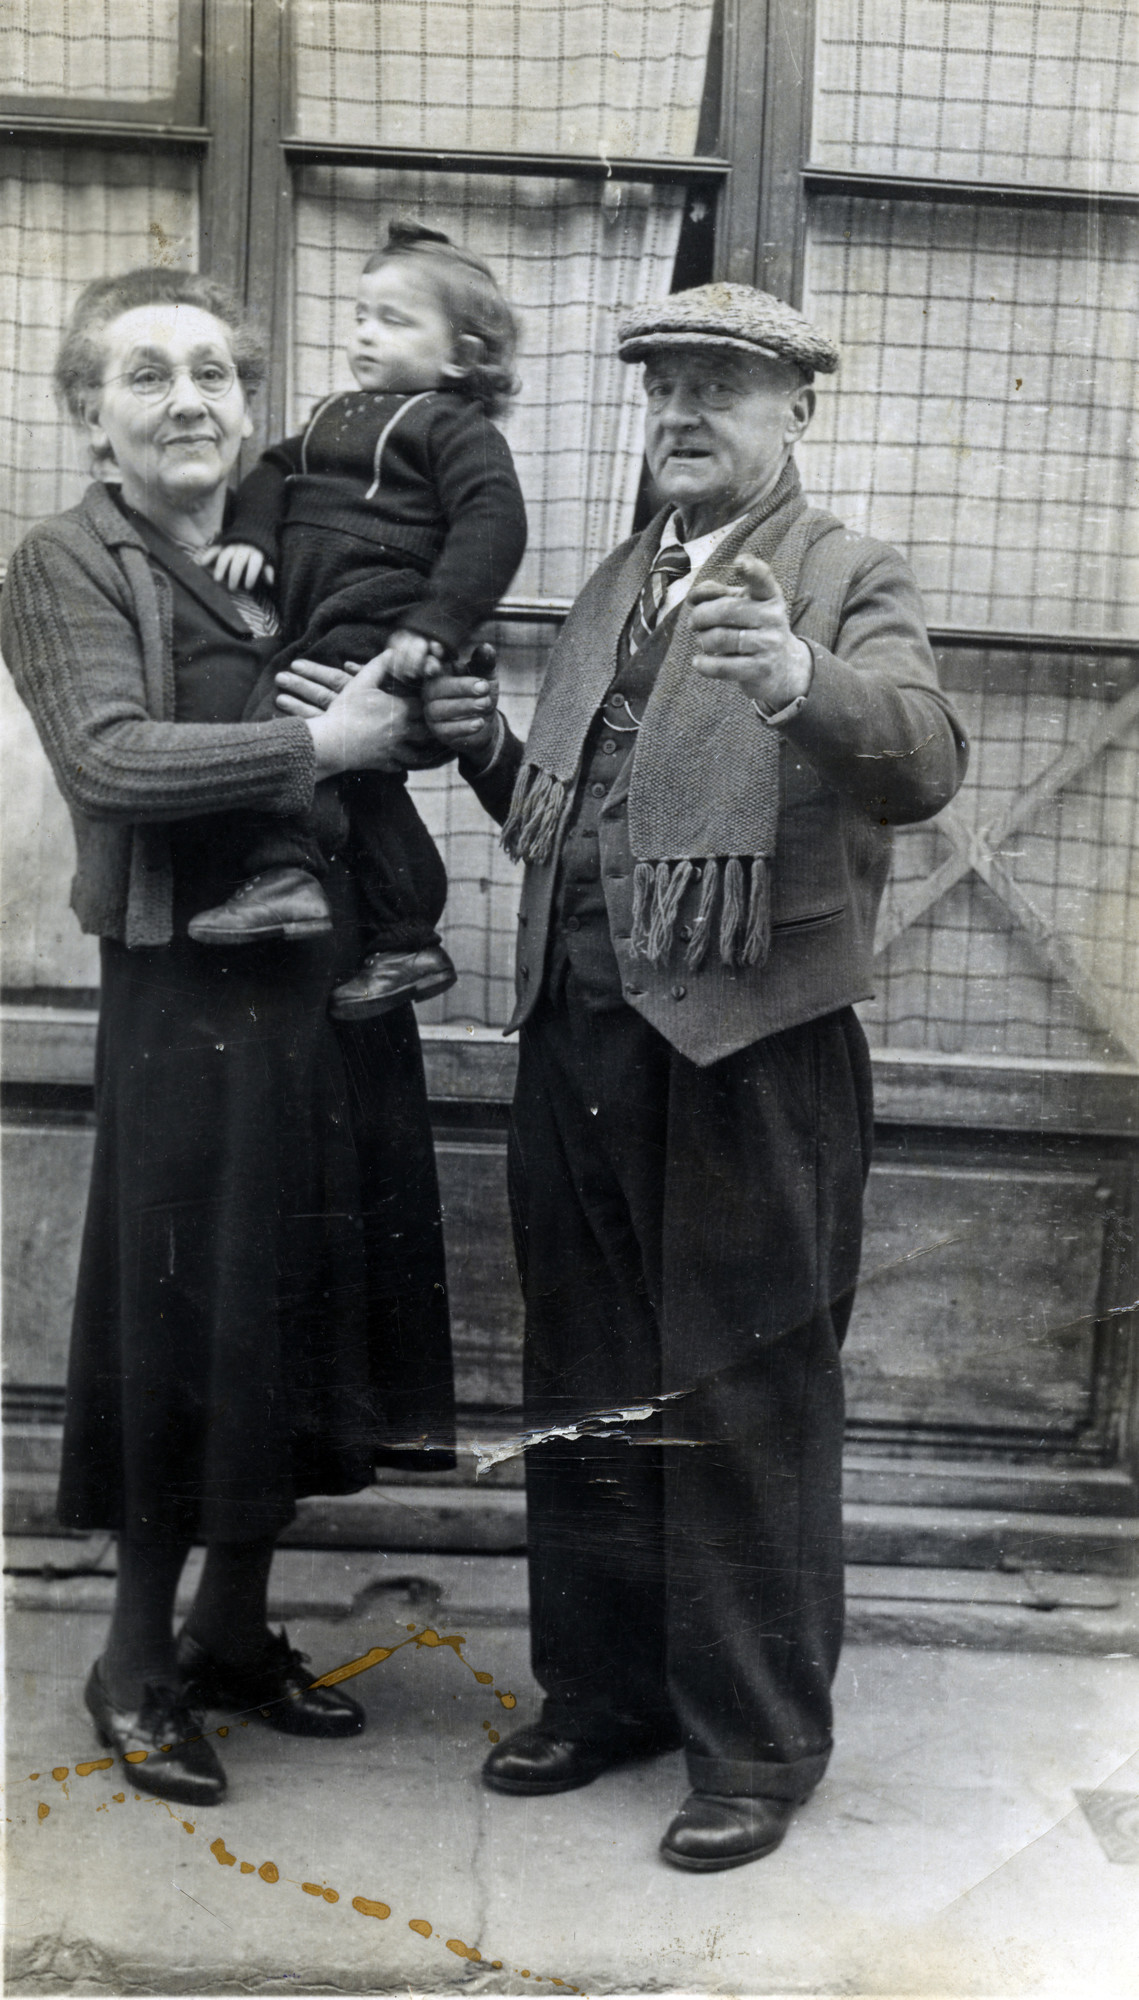 Two-year-old Lazare Tannenbaum with a French couple who had a tobacco store in Moirans and helped care for him.